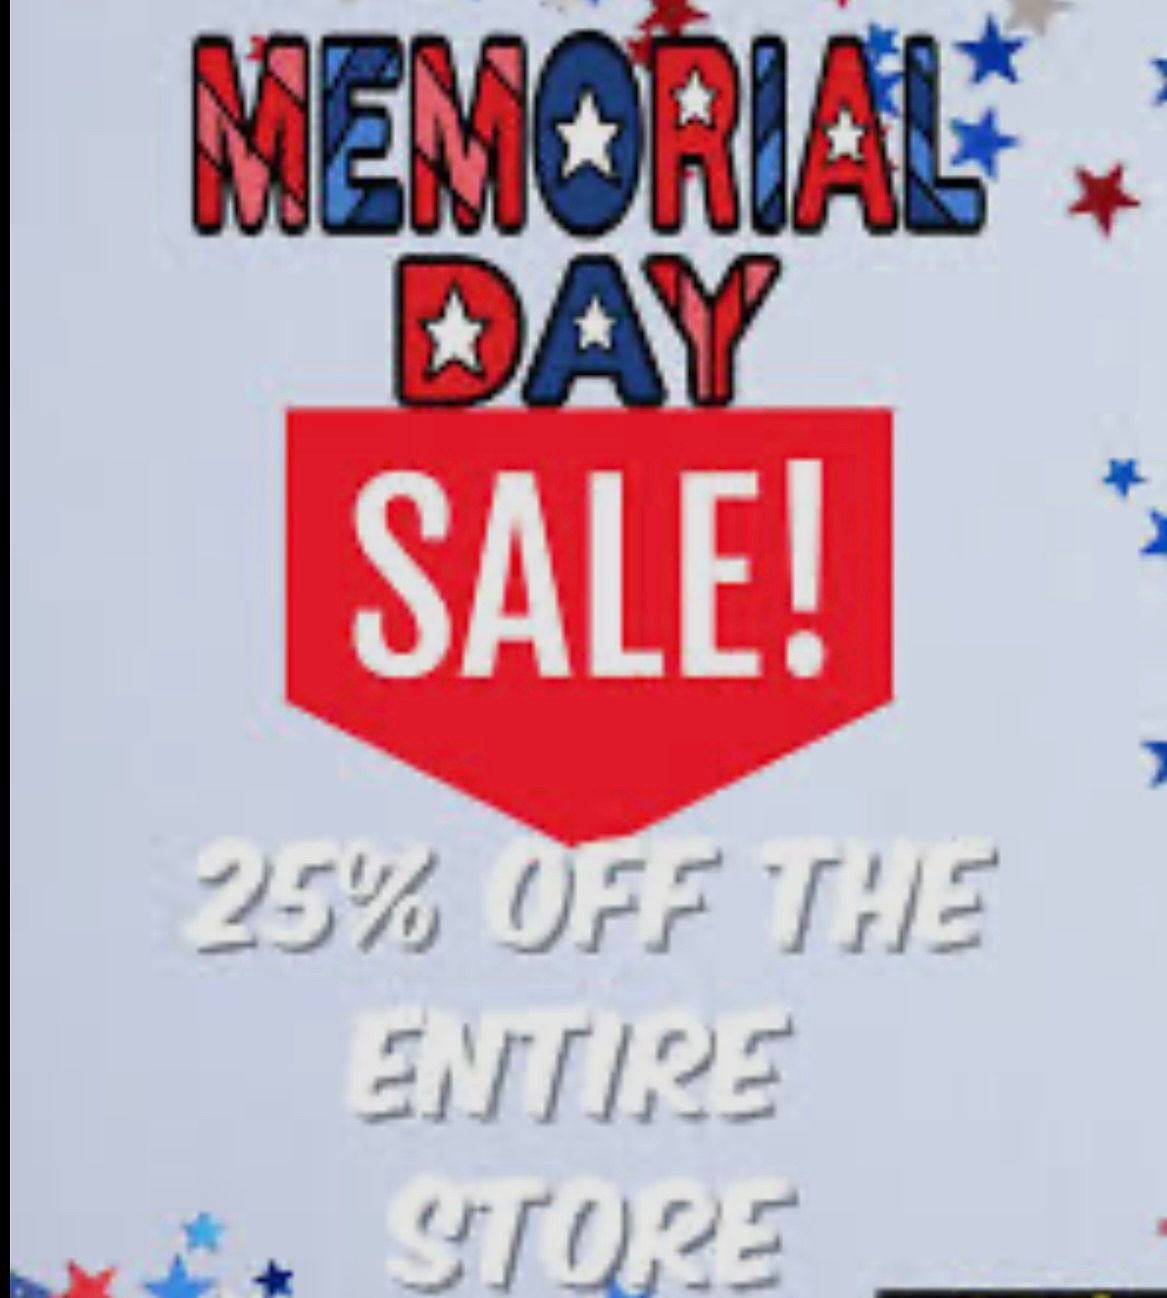 25% off Memorial Day Sale Monday 27th 10-6. Save on everything in the store